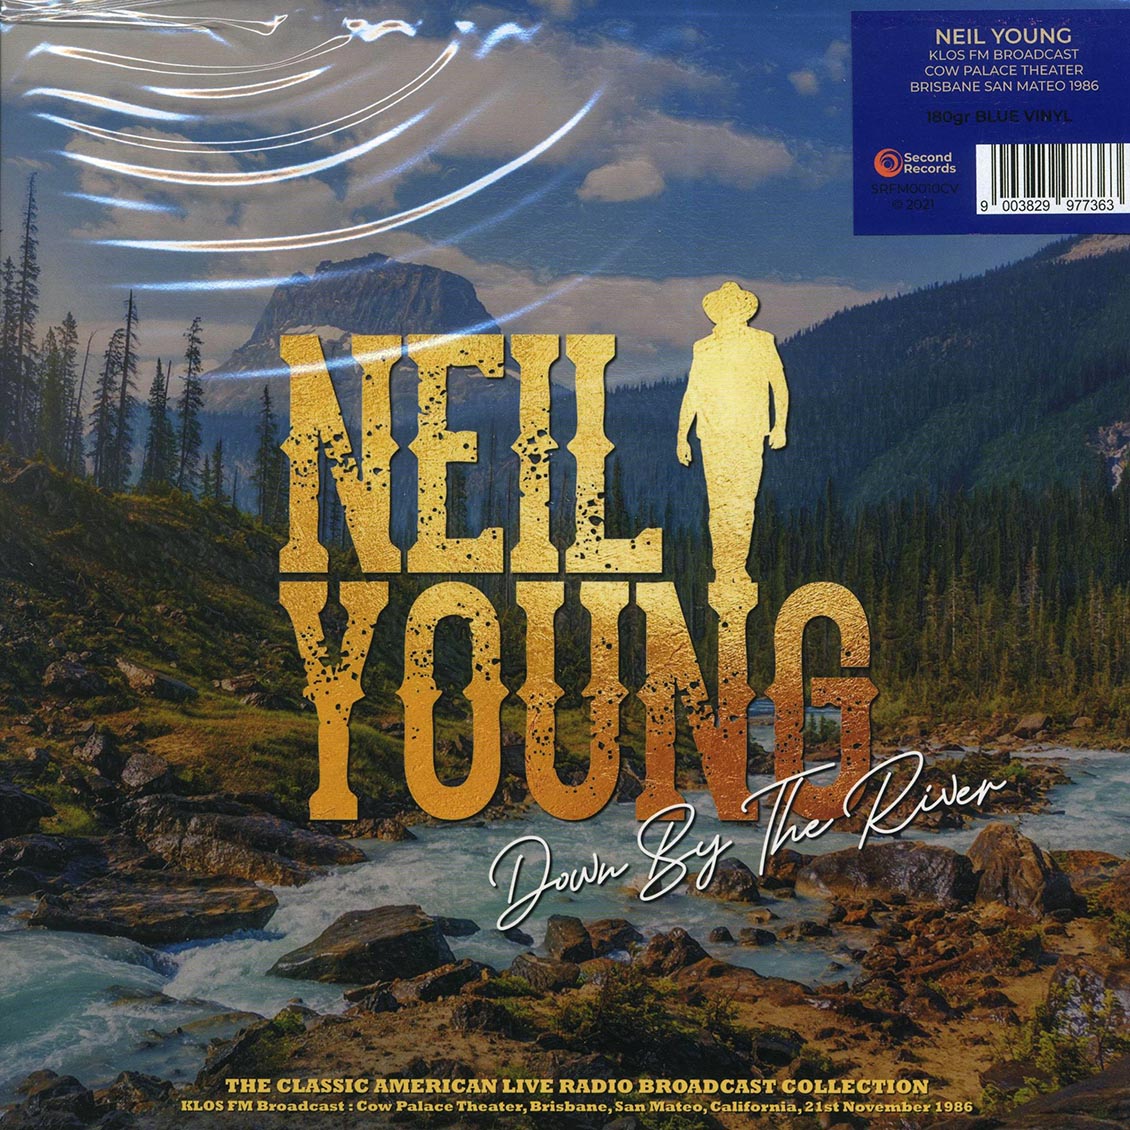 Neil Young - Down By The River: Cow Palace Theather, Brisbane, San Mateo, 21st November 1986 (180g) - Vinyl LP